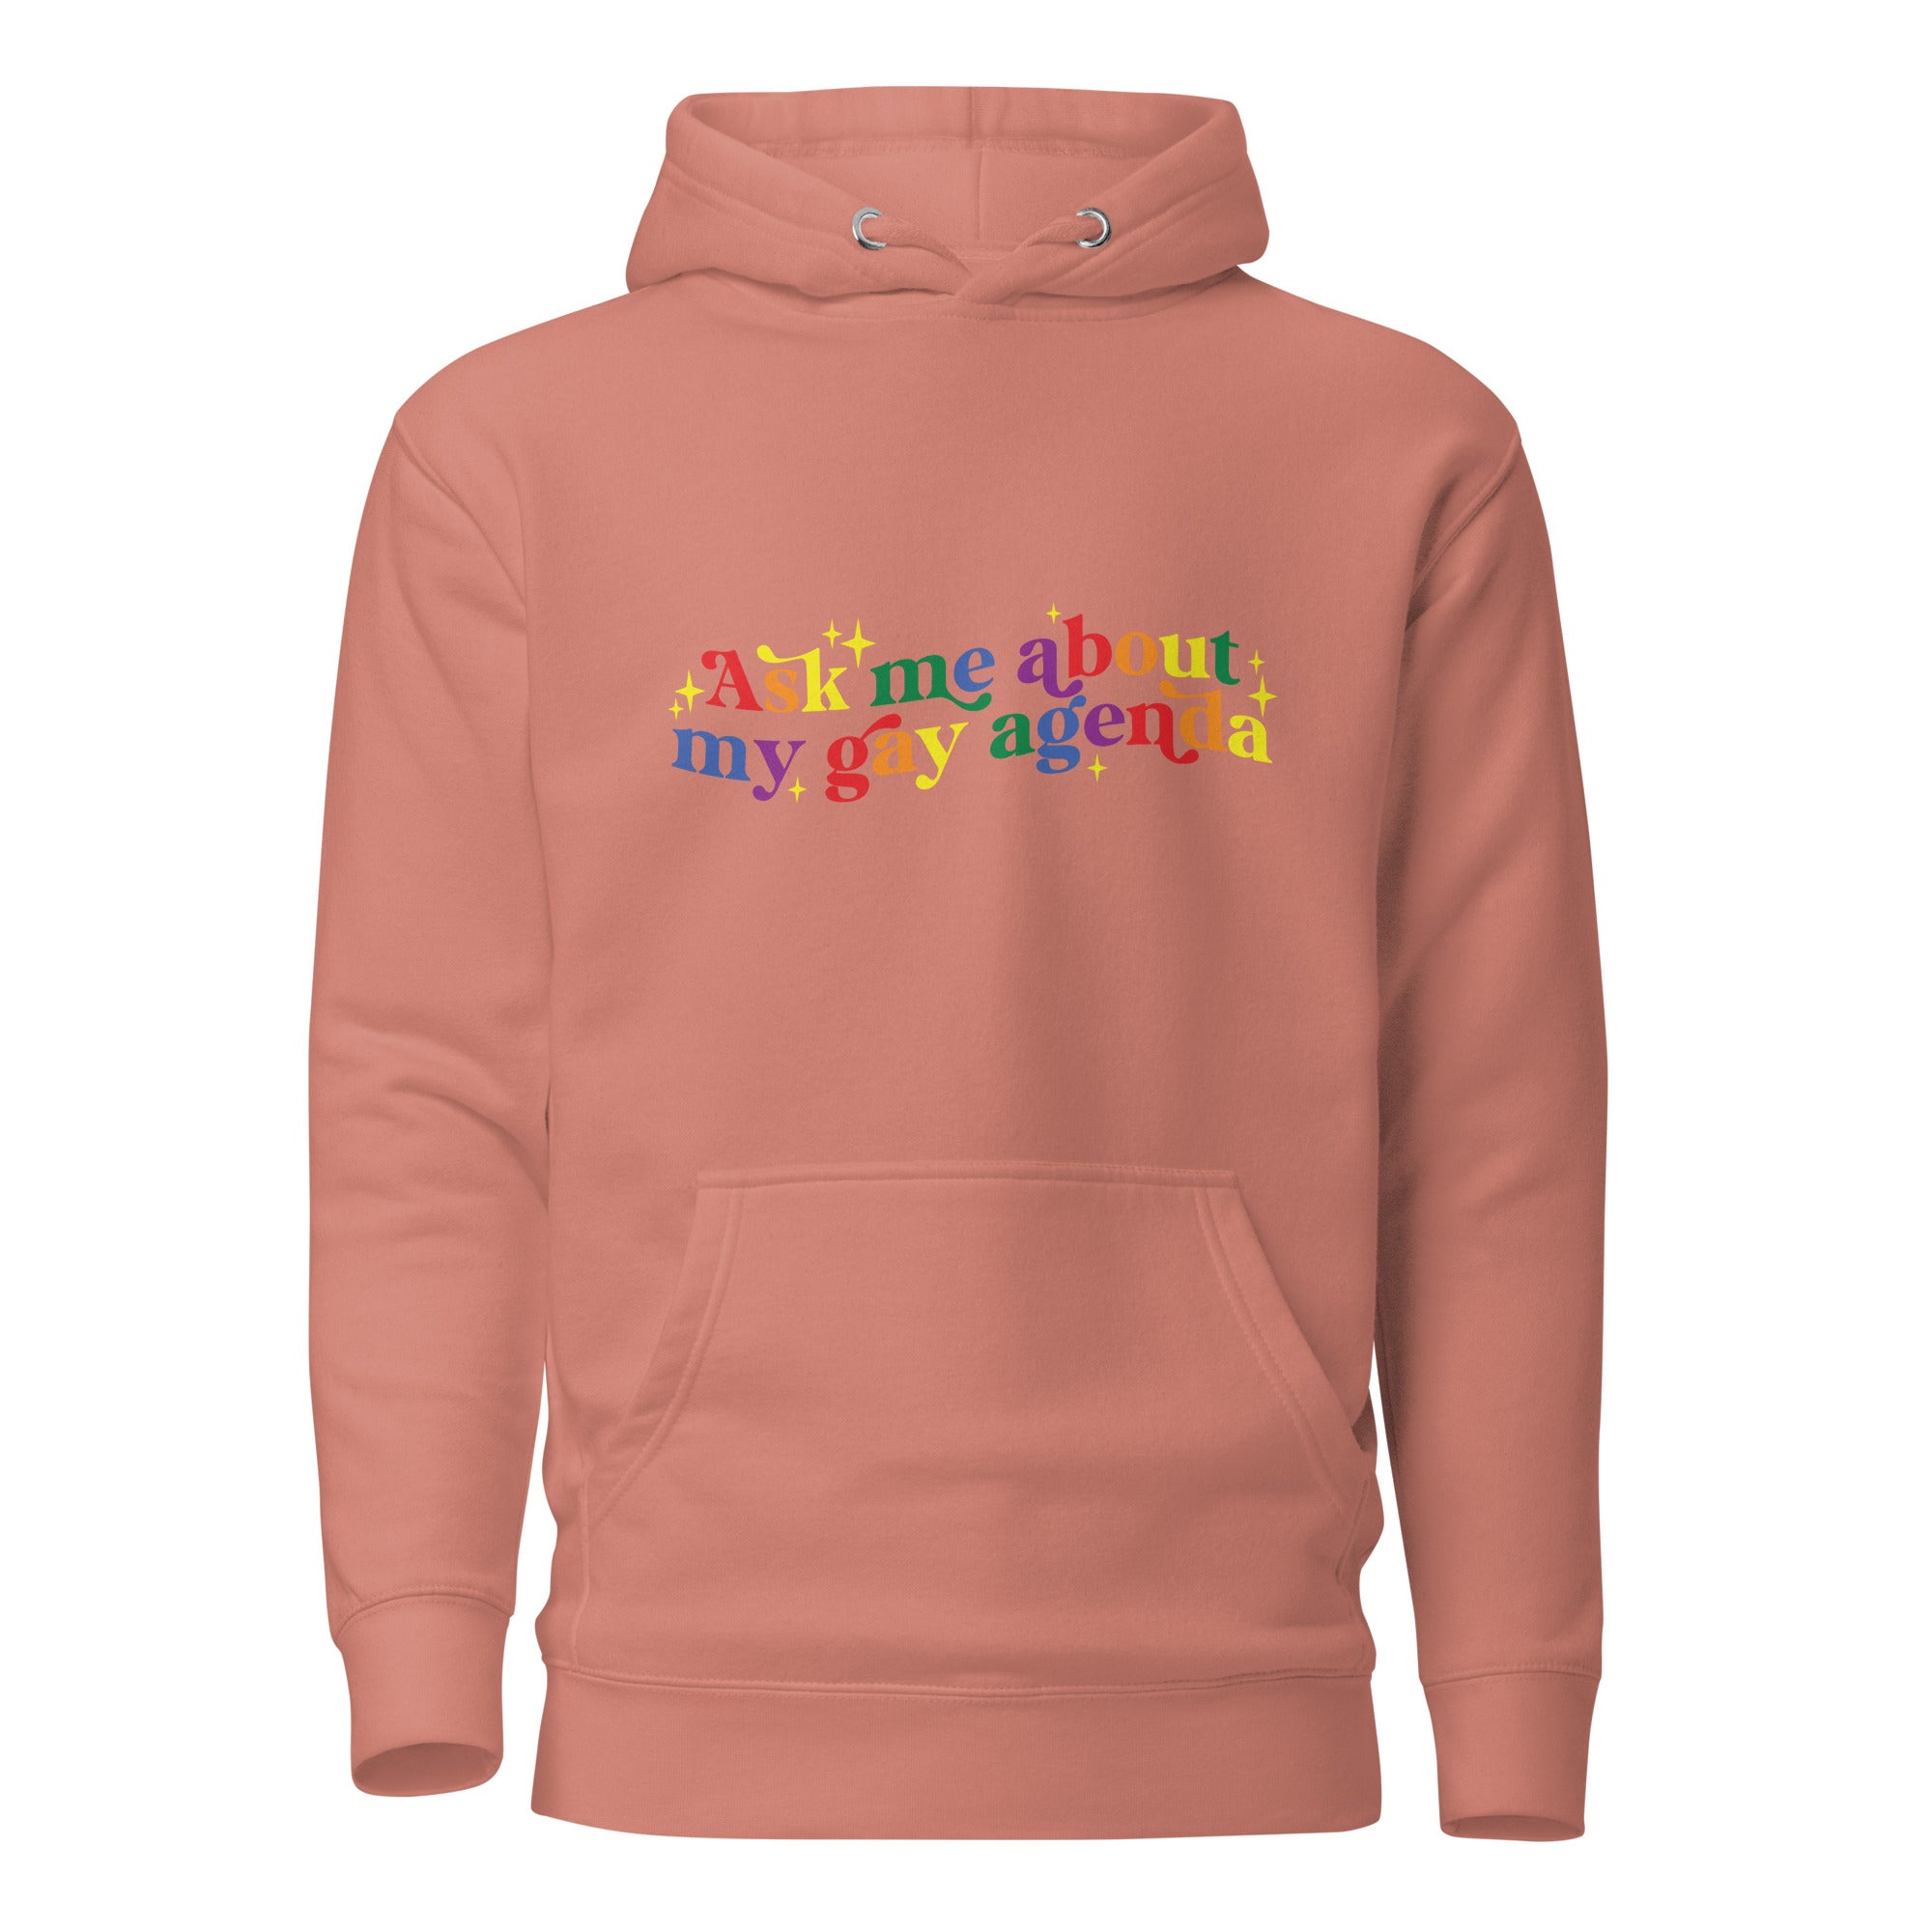 Unisex Hoodie- Ask me about my gay agenda